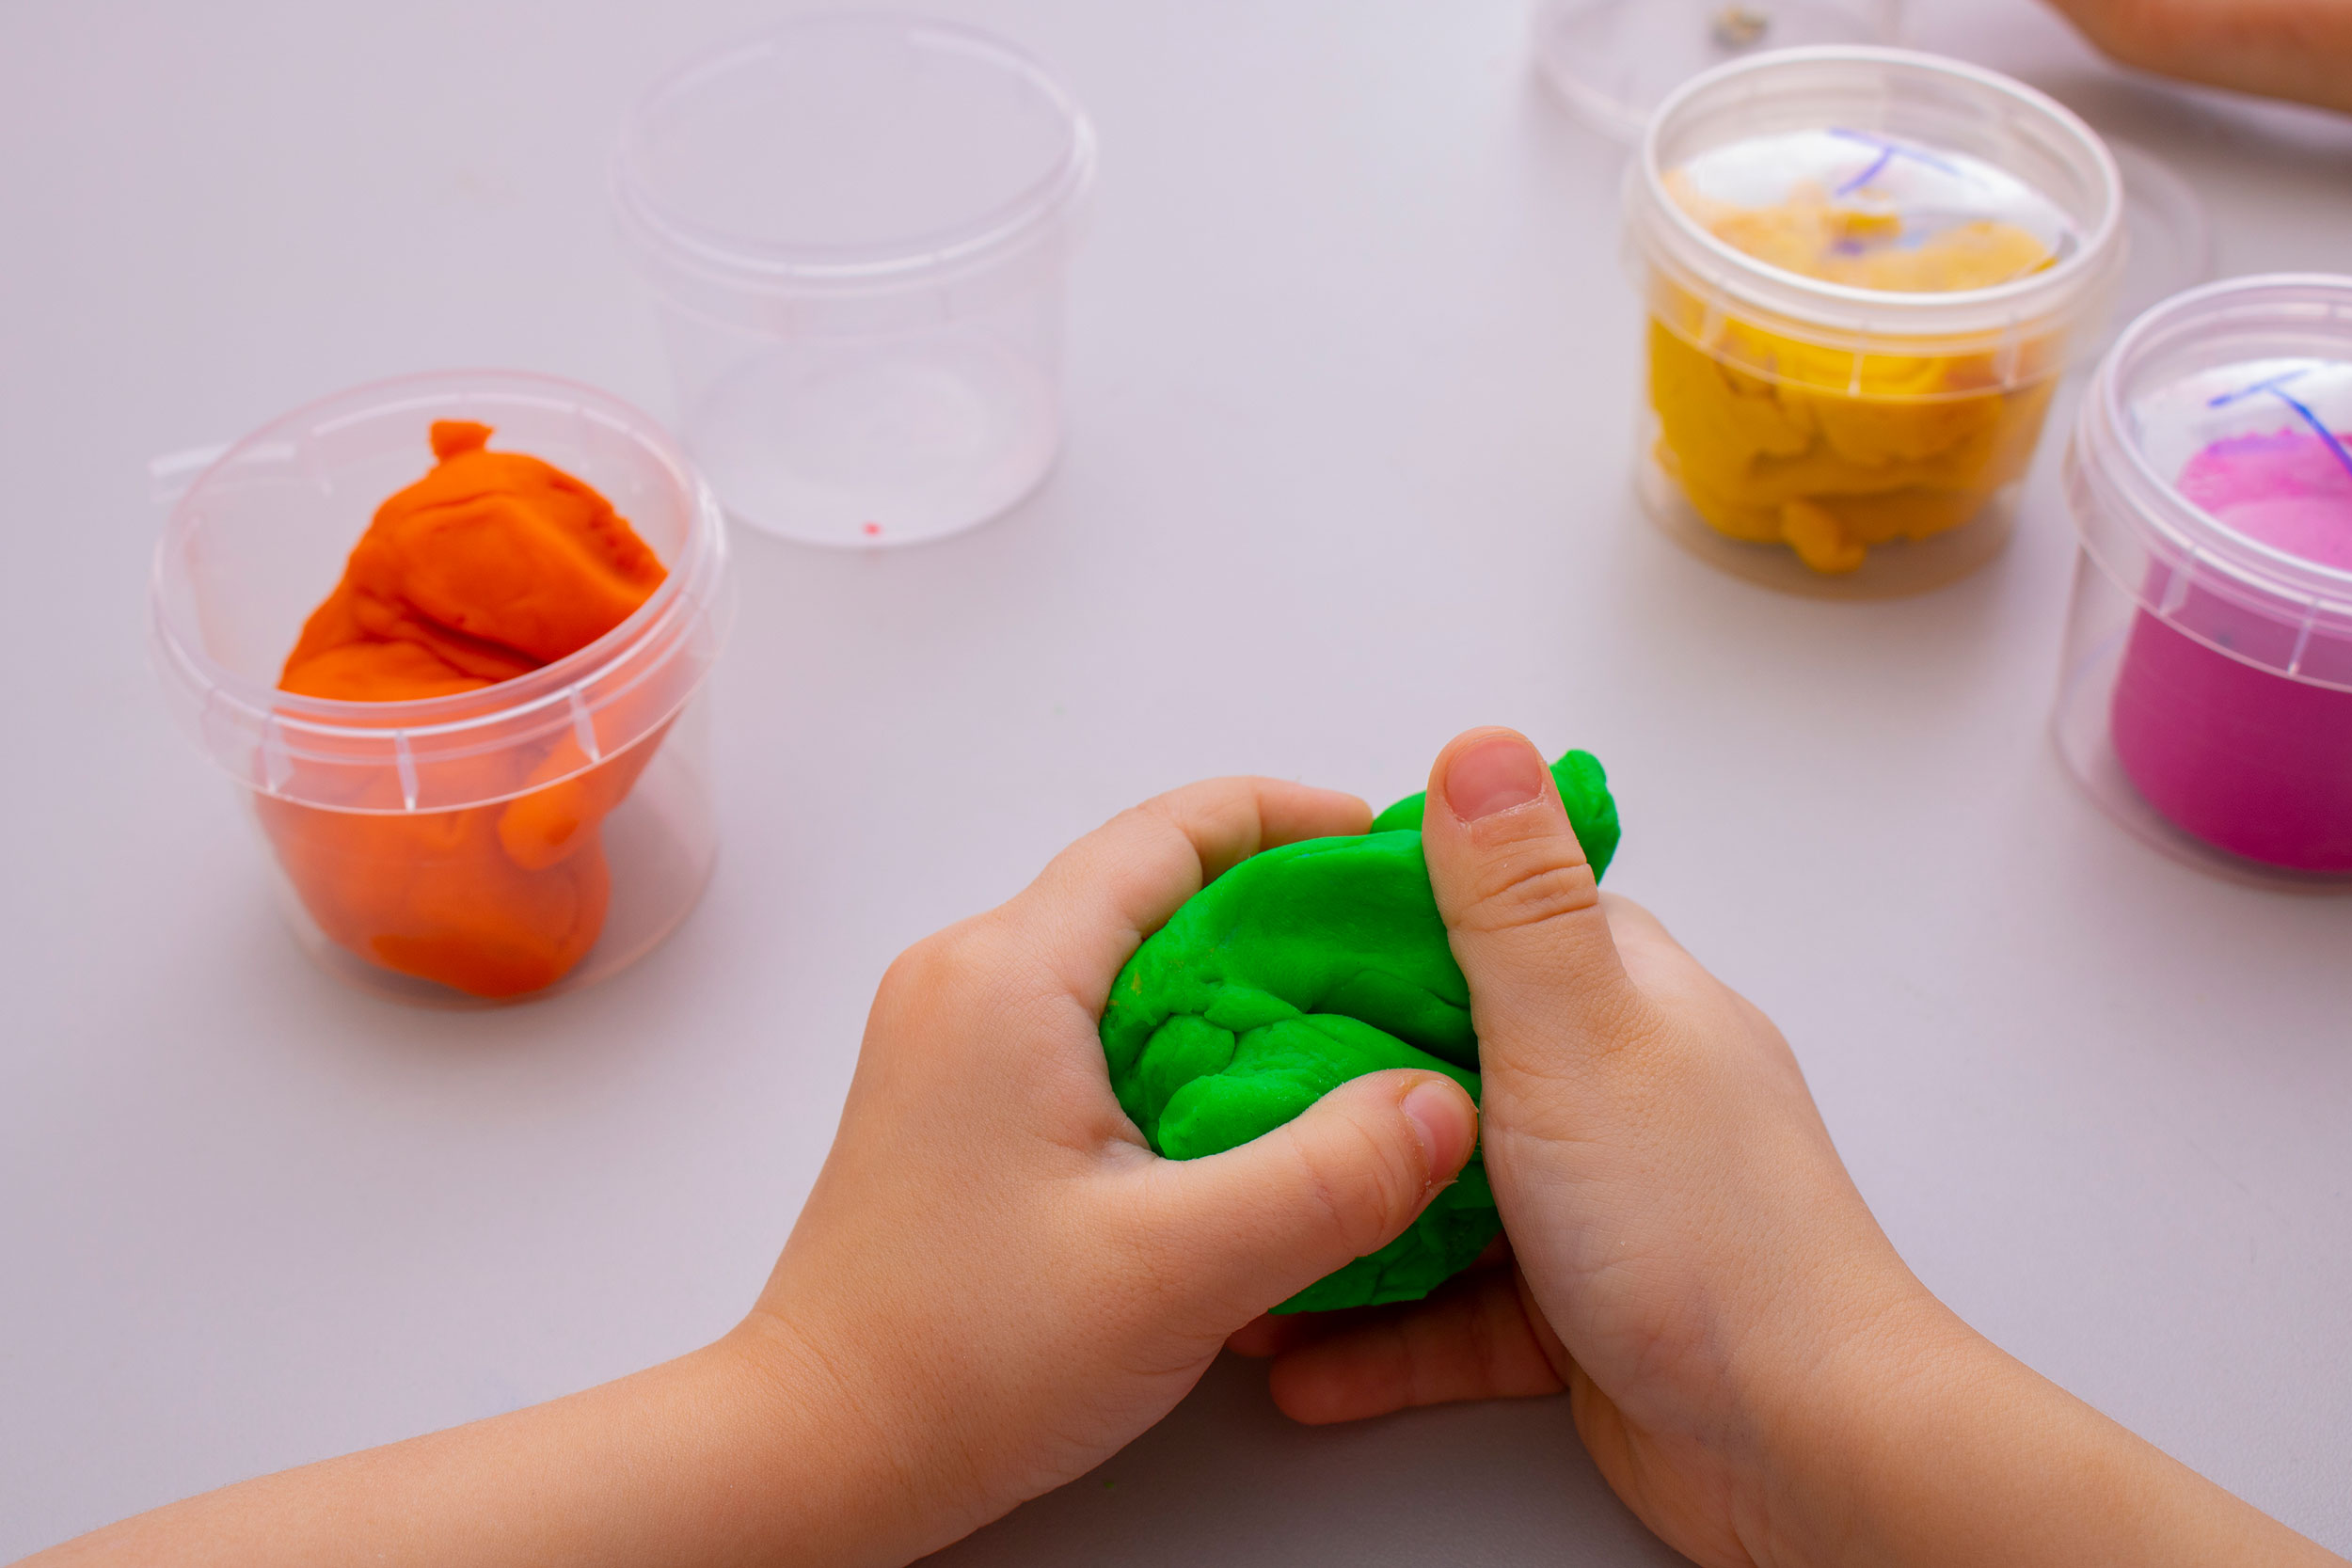 A close up of play dough in cups while a child's hands manipulate a clump of green play dough.
